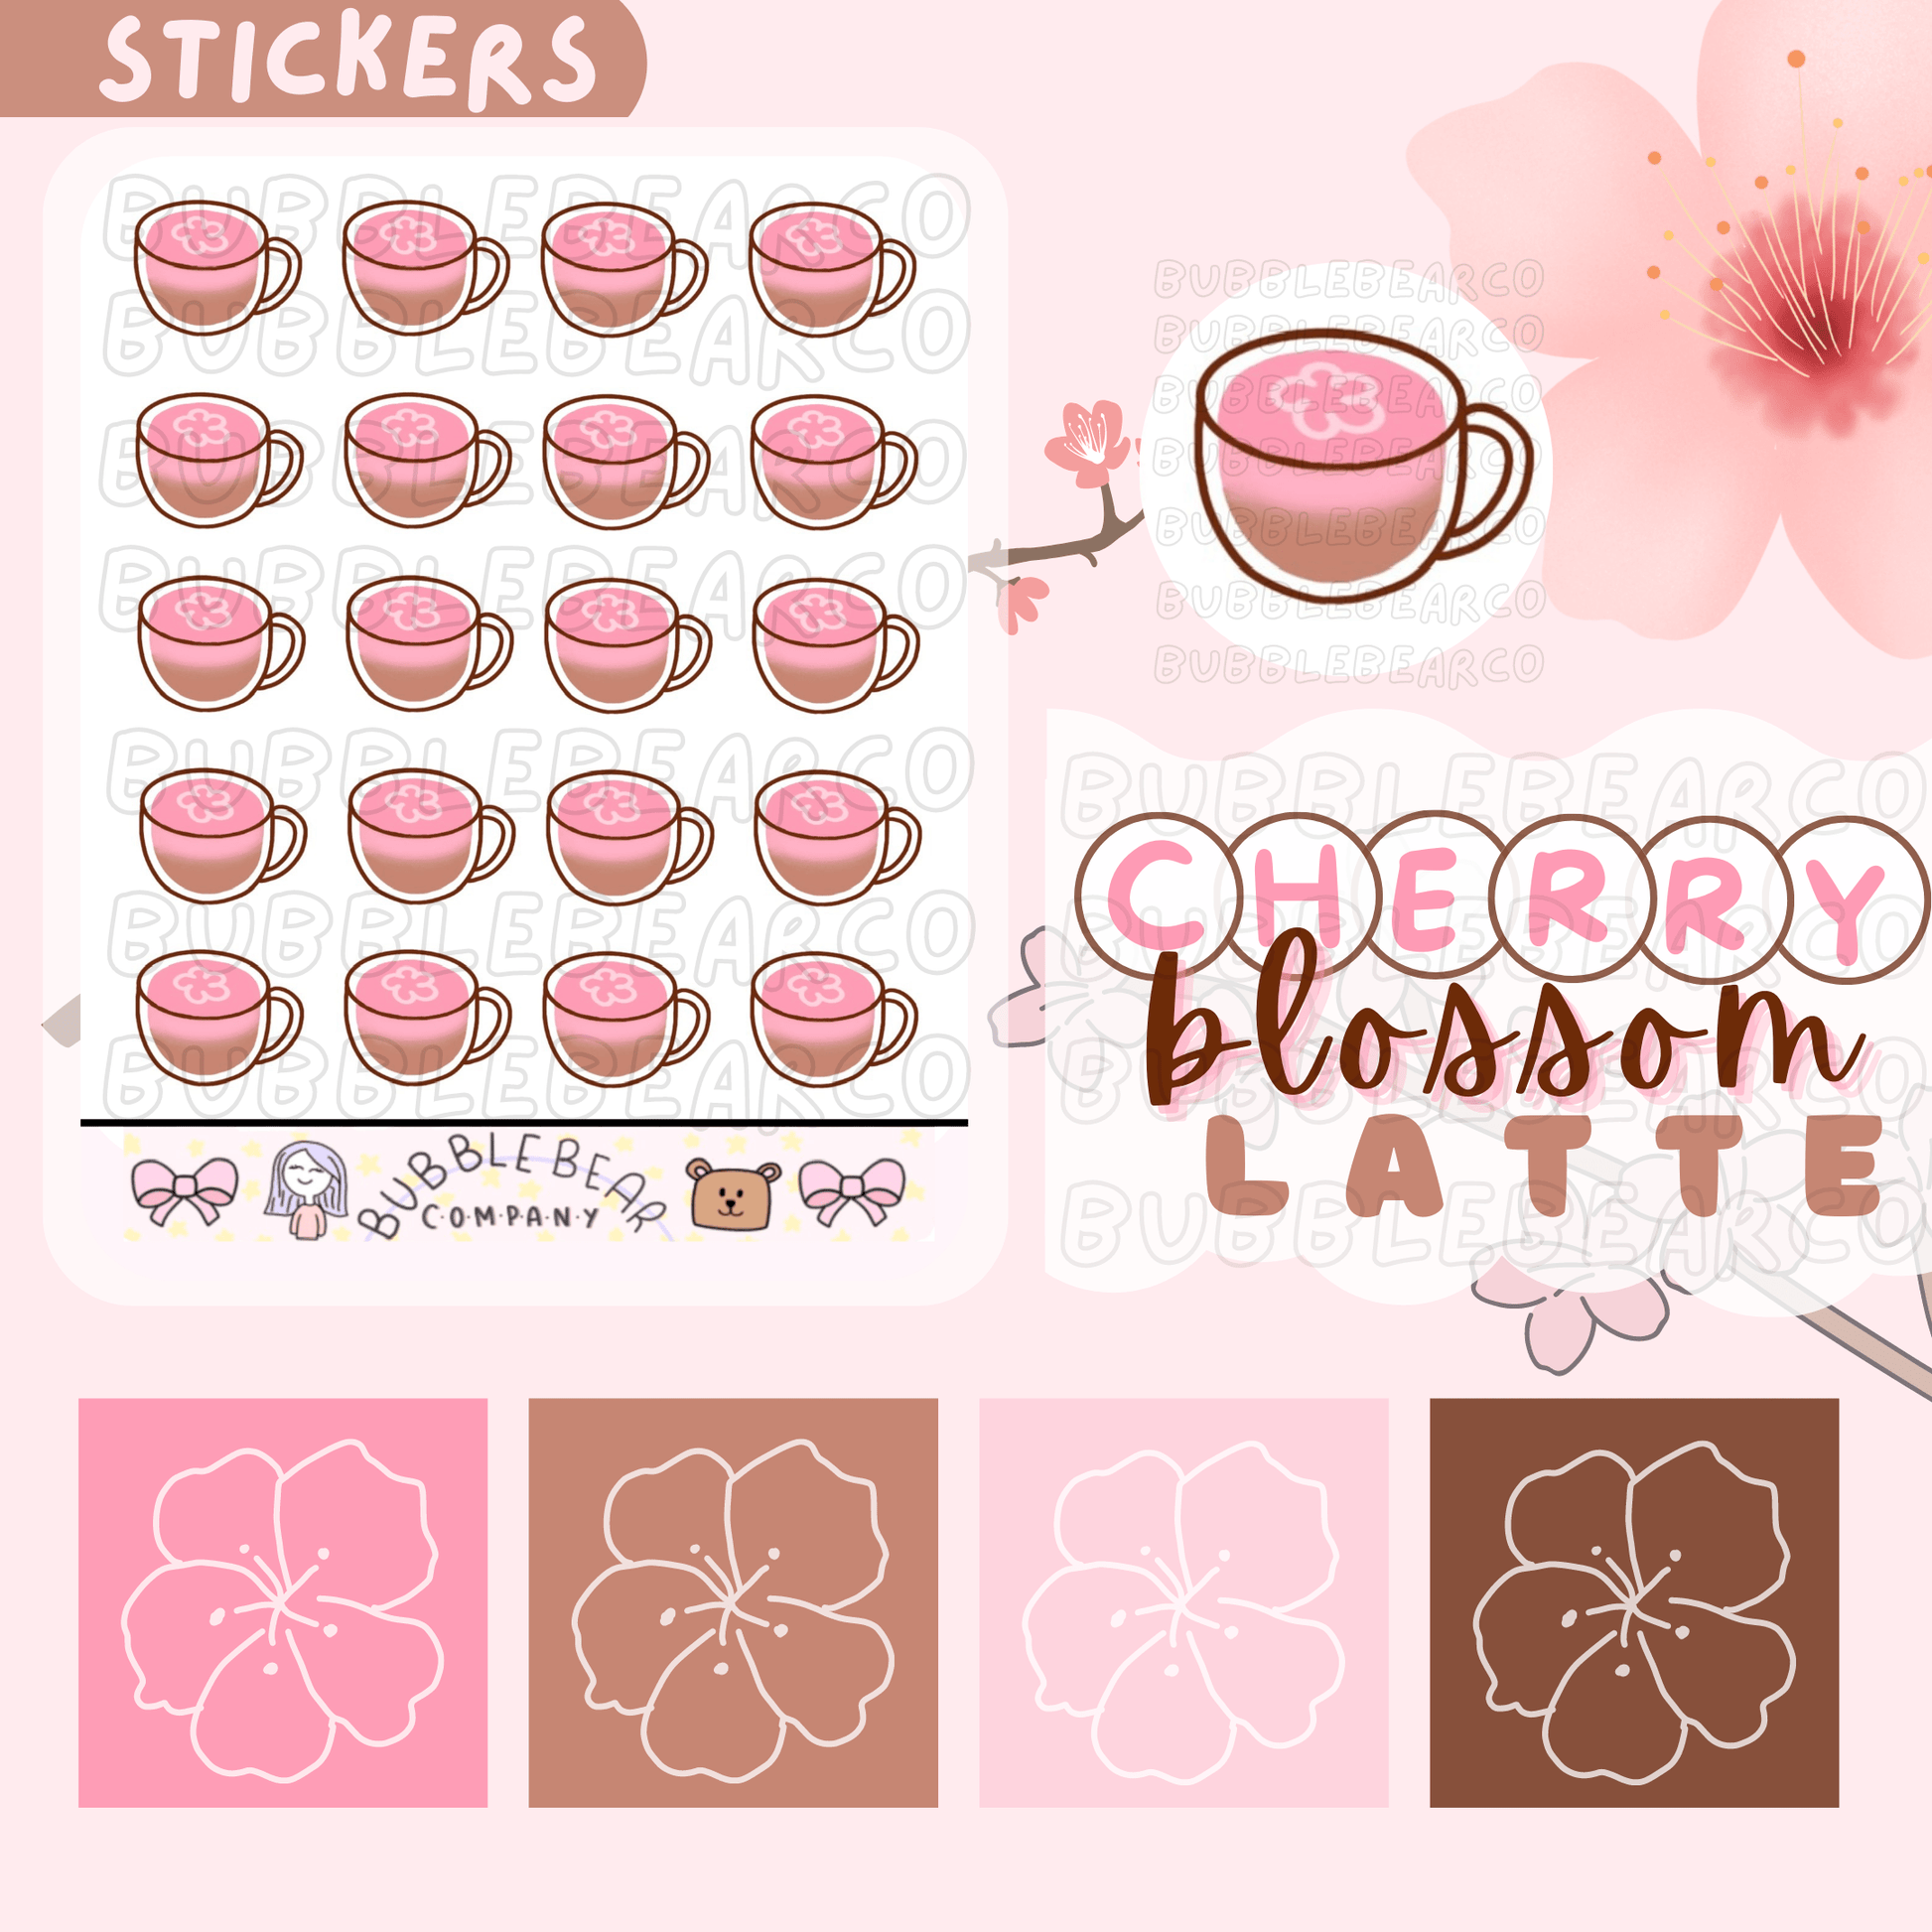 Beary Unique Lattes and Teas Stickers - Bubble Bear Co